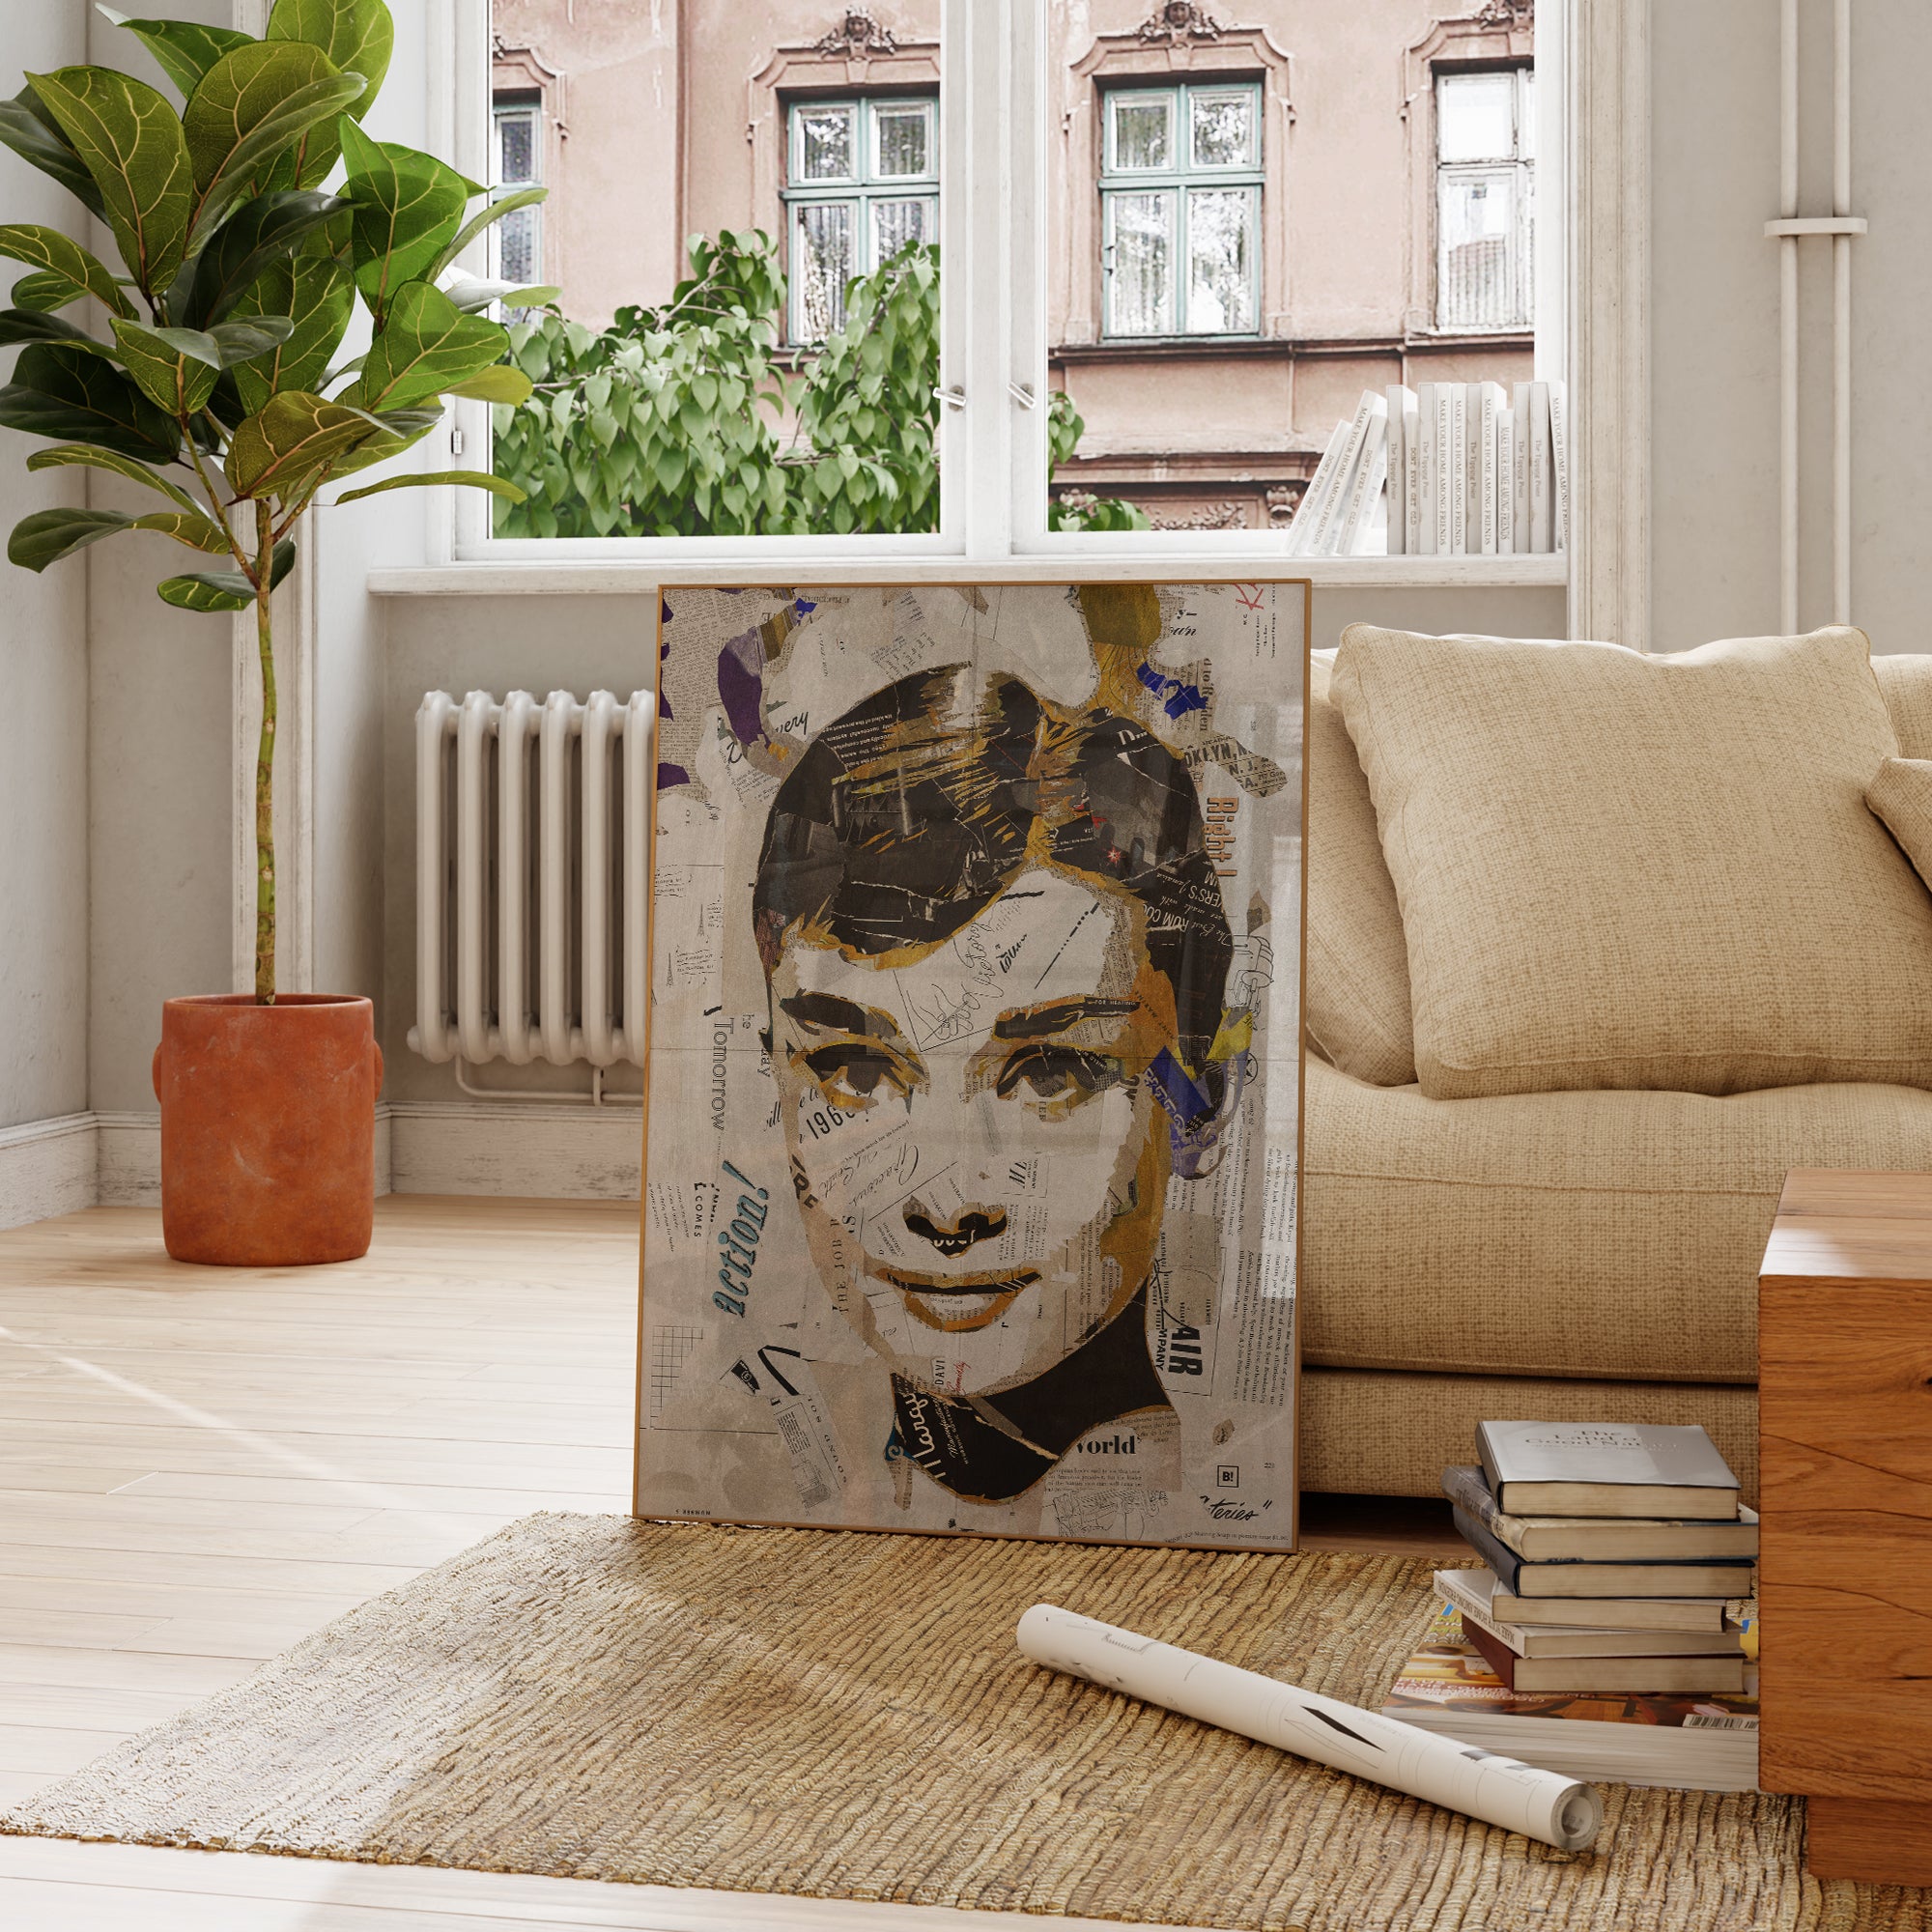 Be inspired by our iconic collage portrait art print of Audrey Hepburn. This artwork was printed using the giclée process on archival acid-free paper and is presented in a French living room, capturing its timeless beauty in every detail.